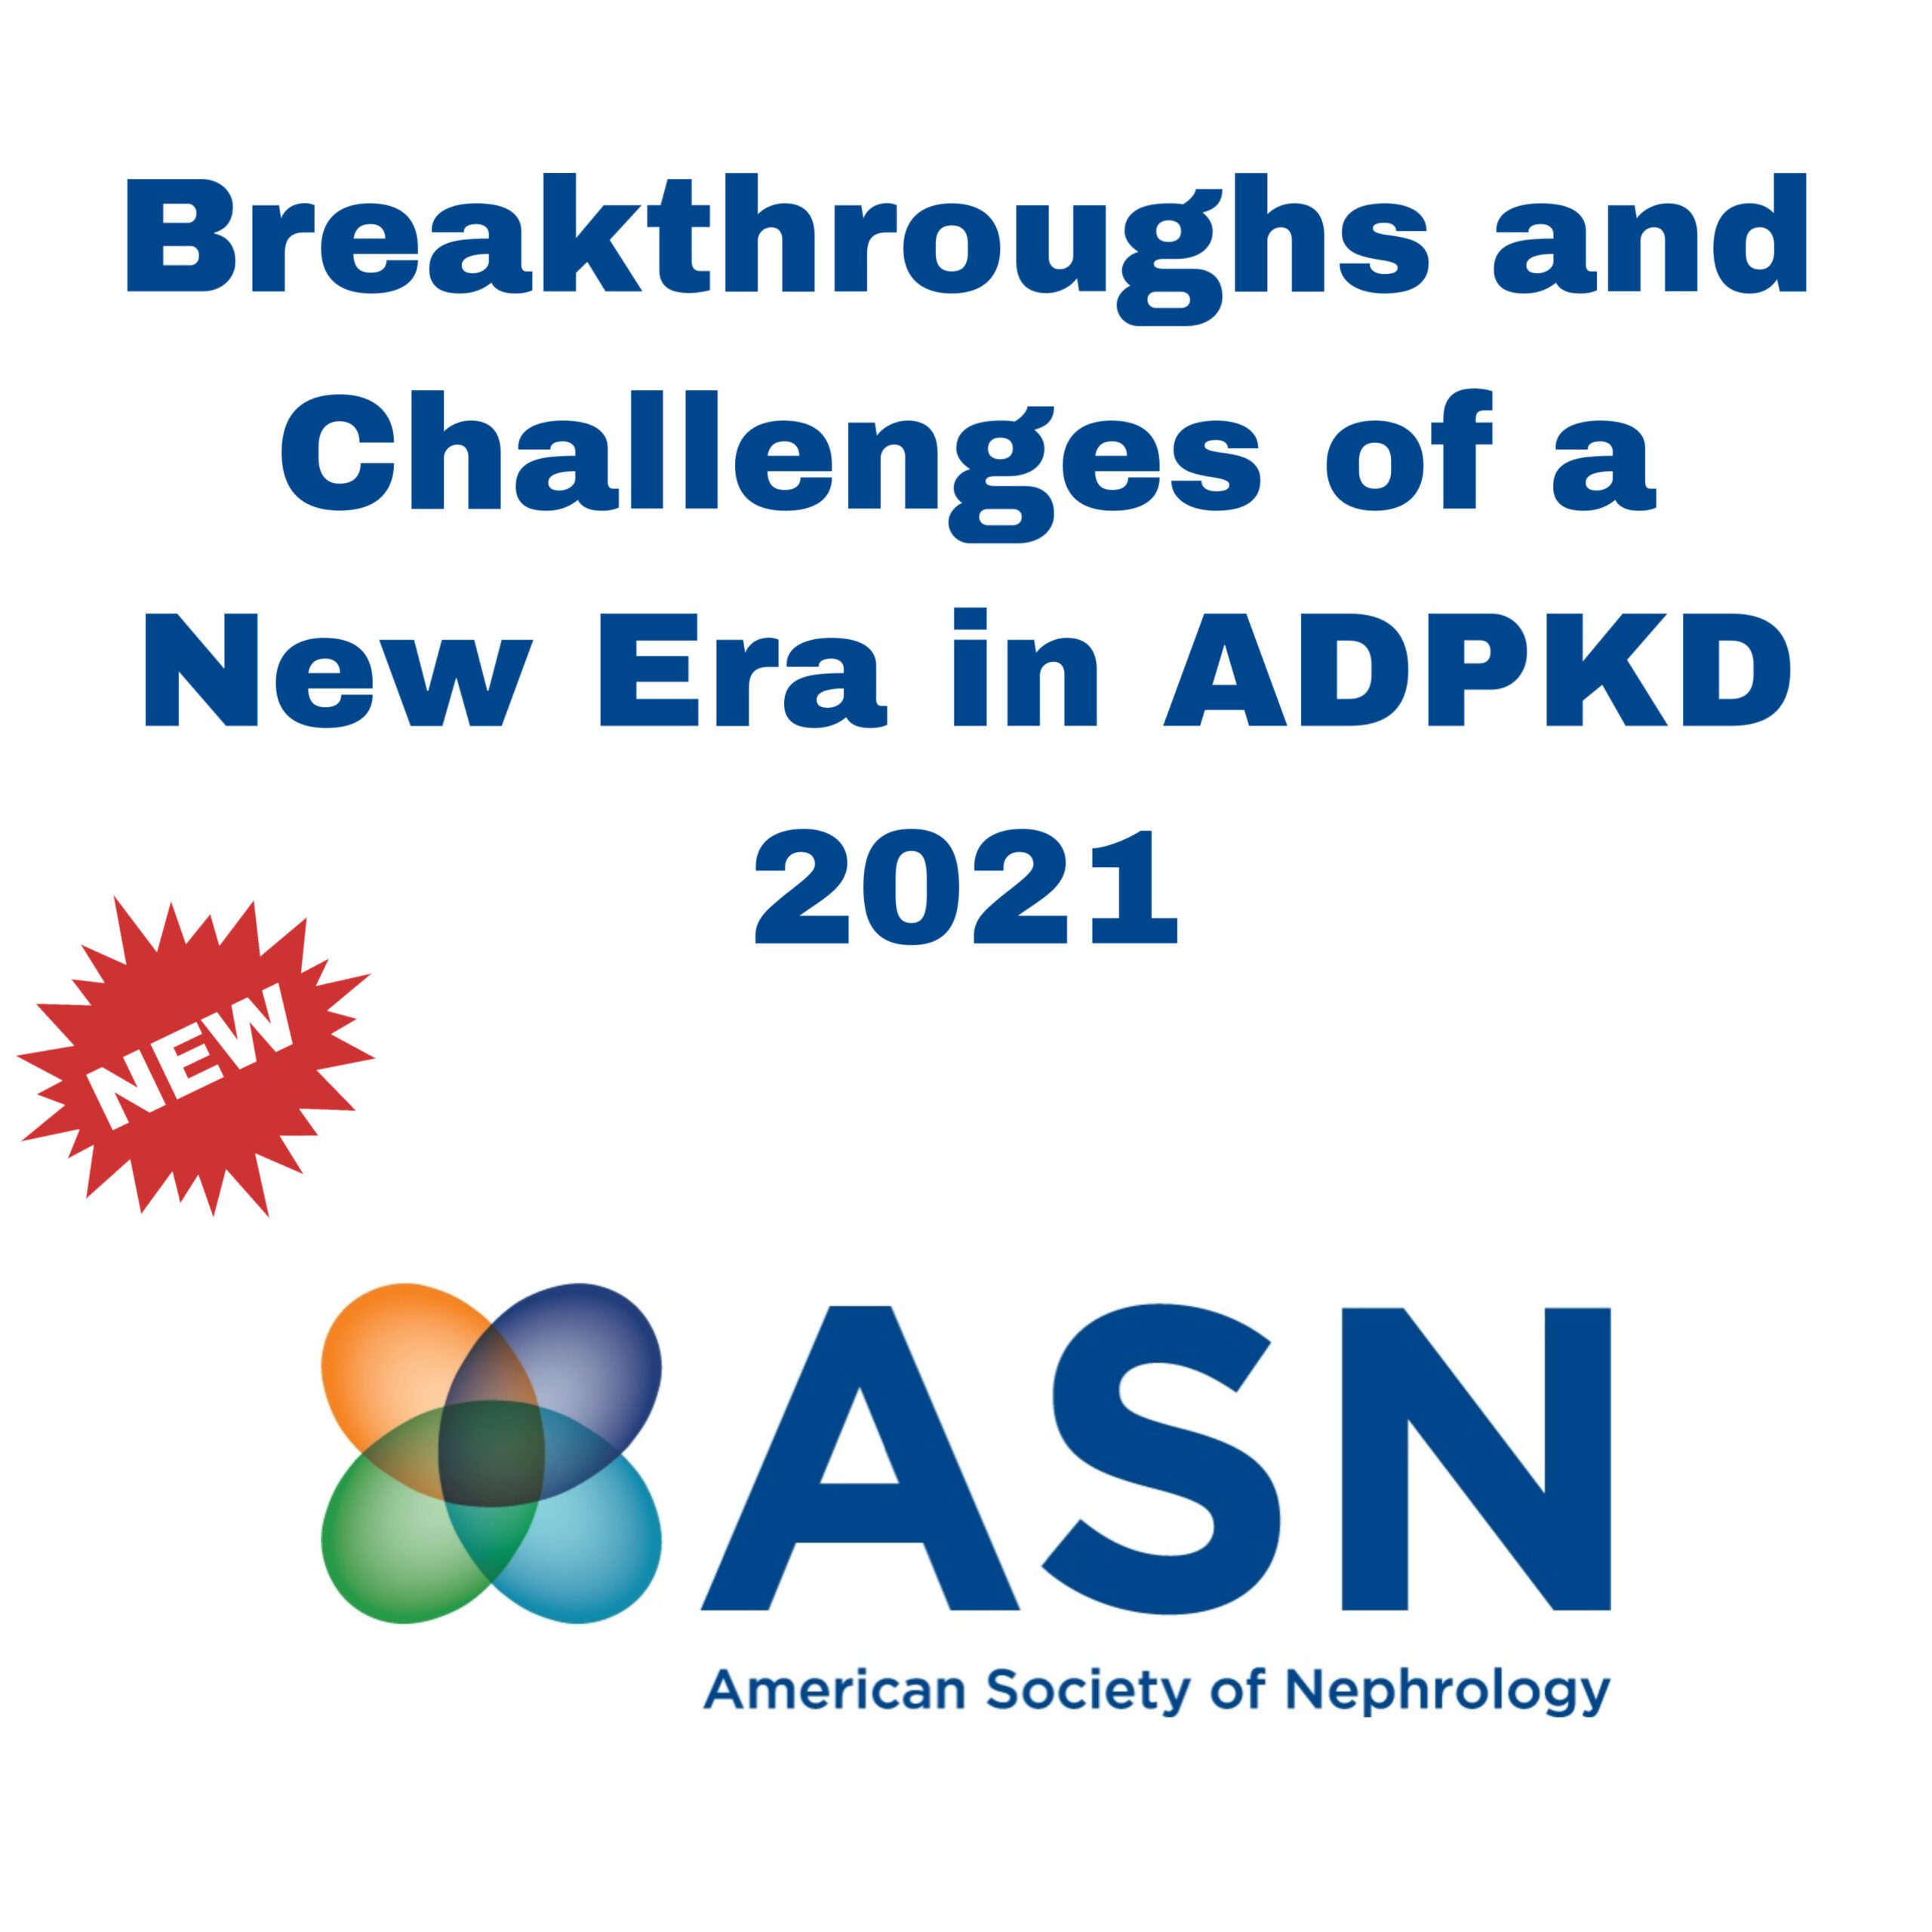 ASN Breakthroughs and Challenges of a New Era in ADPKD